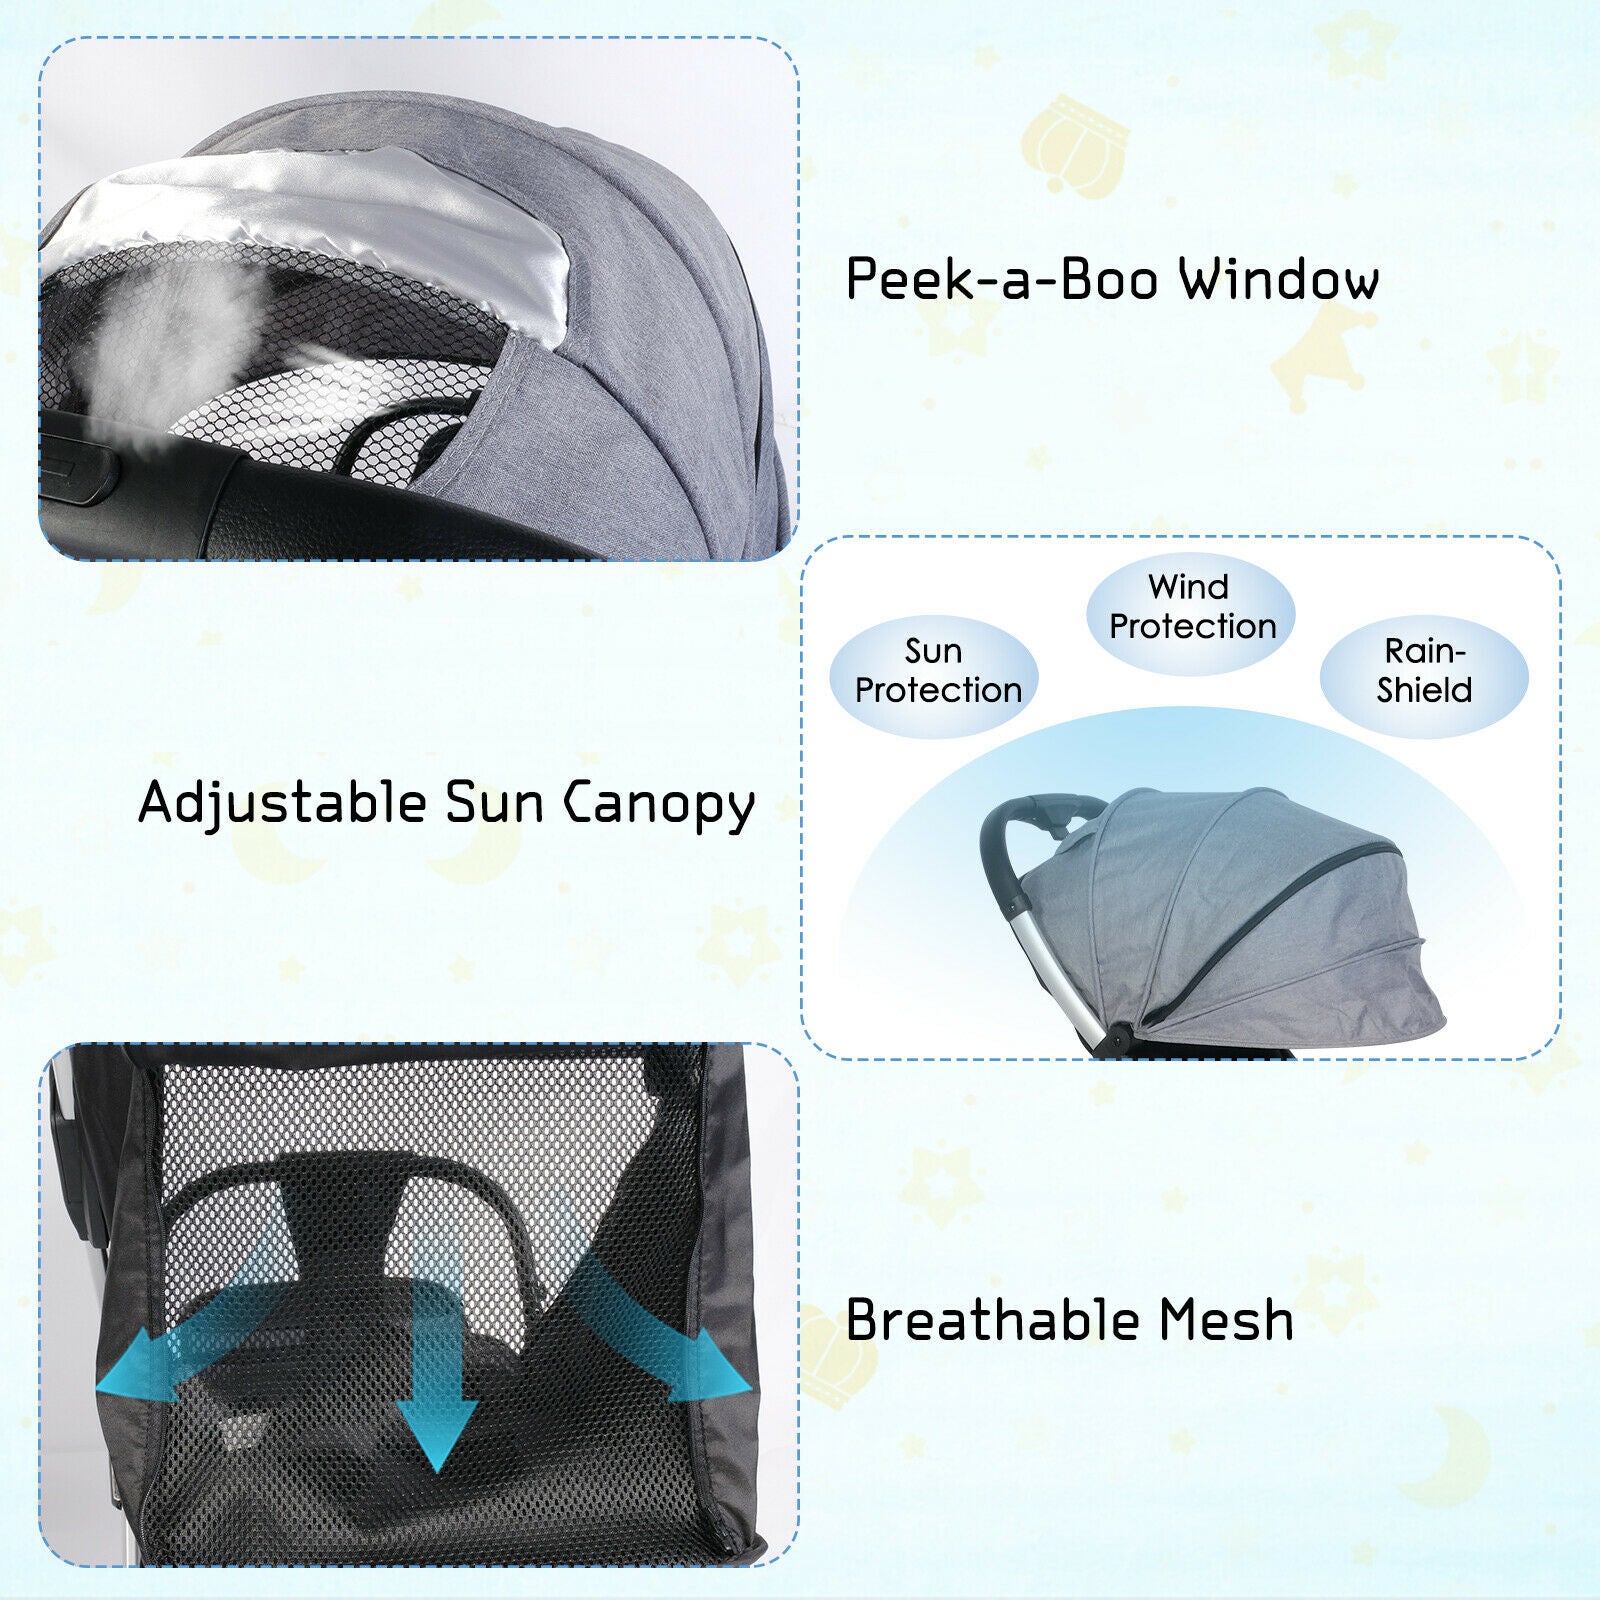 Lightweight Baby Stroller w/ Adjustable Canopy & Reclining Seat, One-Hand Quick Folding Stroller